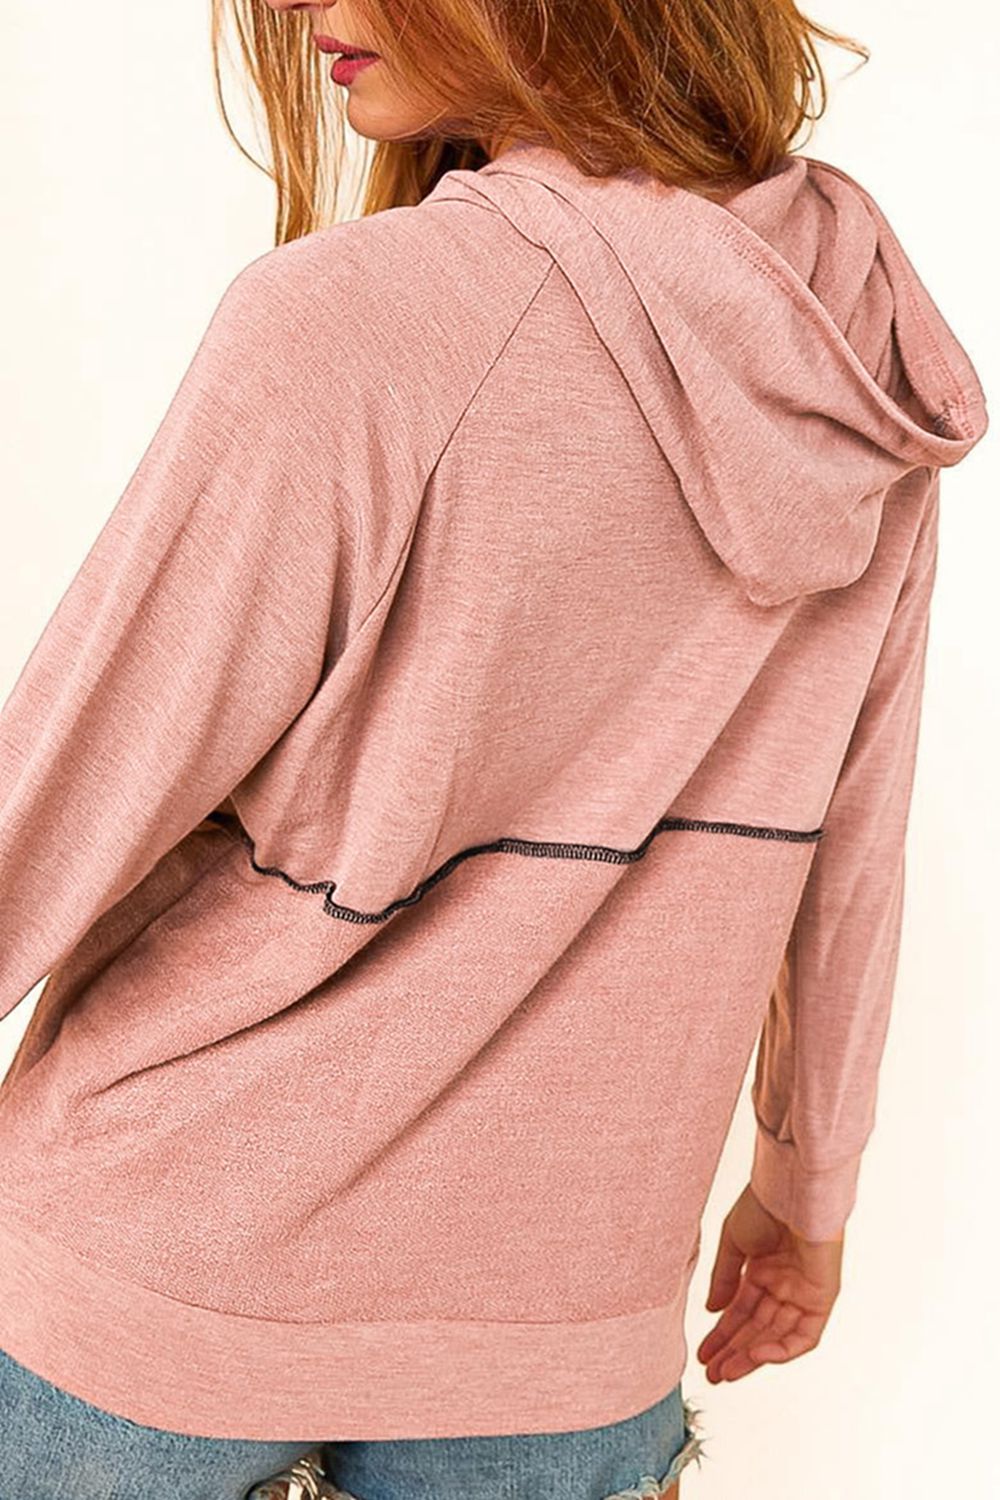 Buttoned Long Sleeve Hoodie - Women’s Clothing & Accessories - Shirts & Tops - 2 - 2024